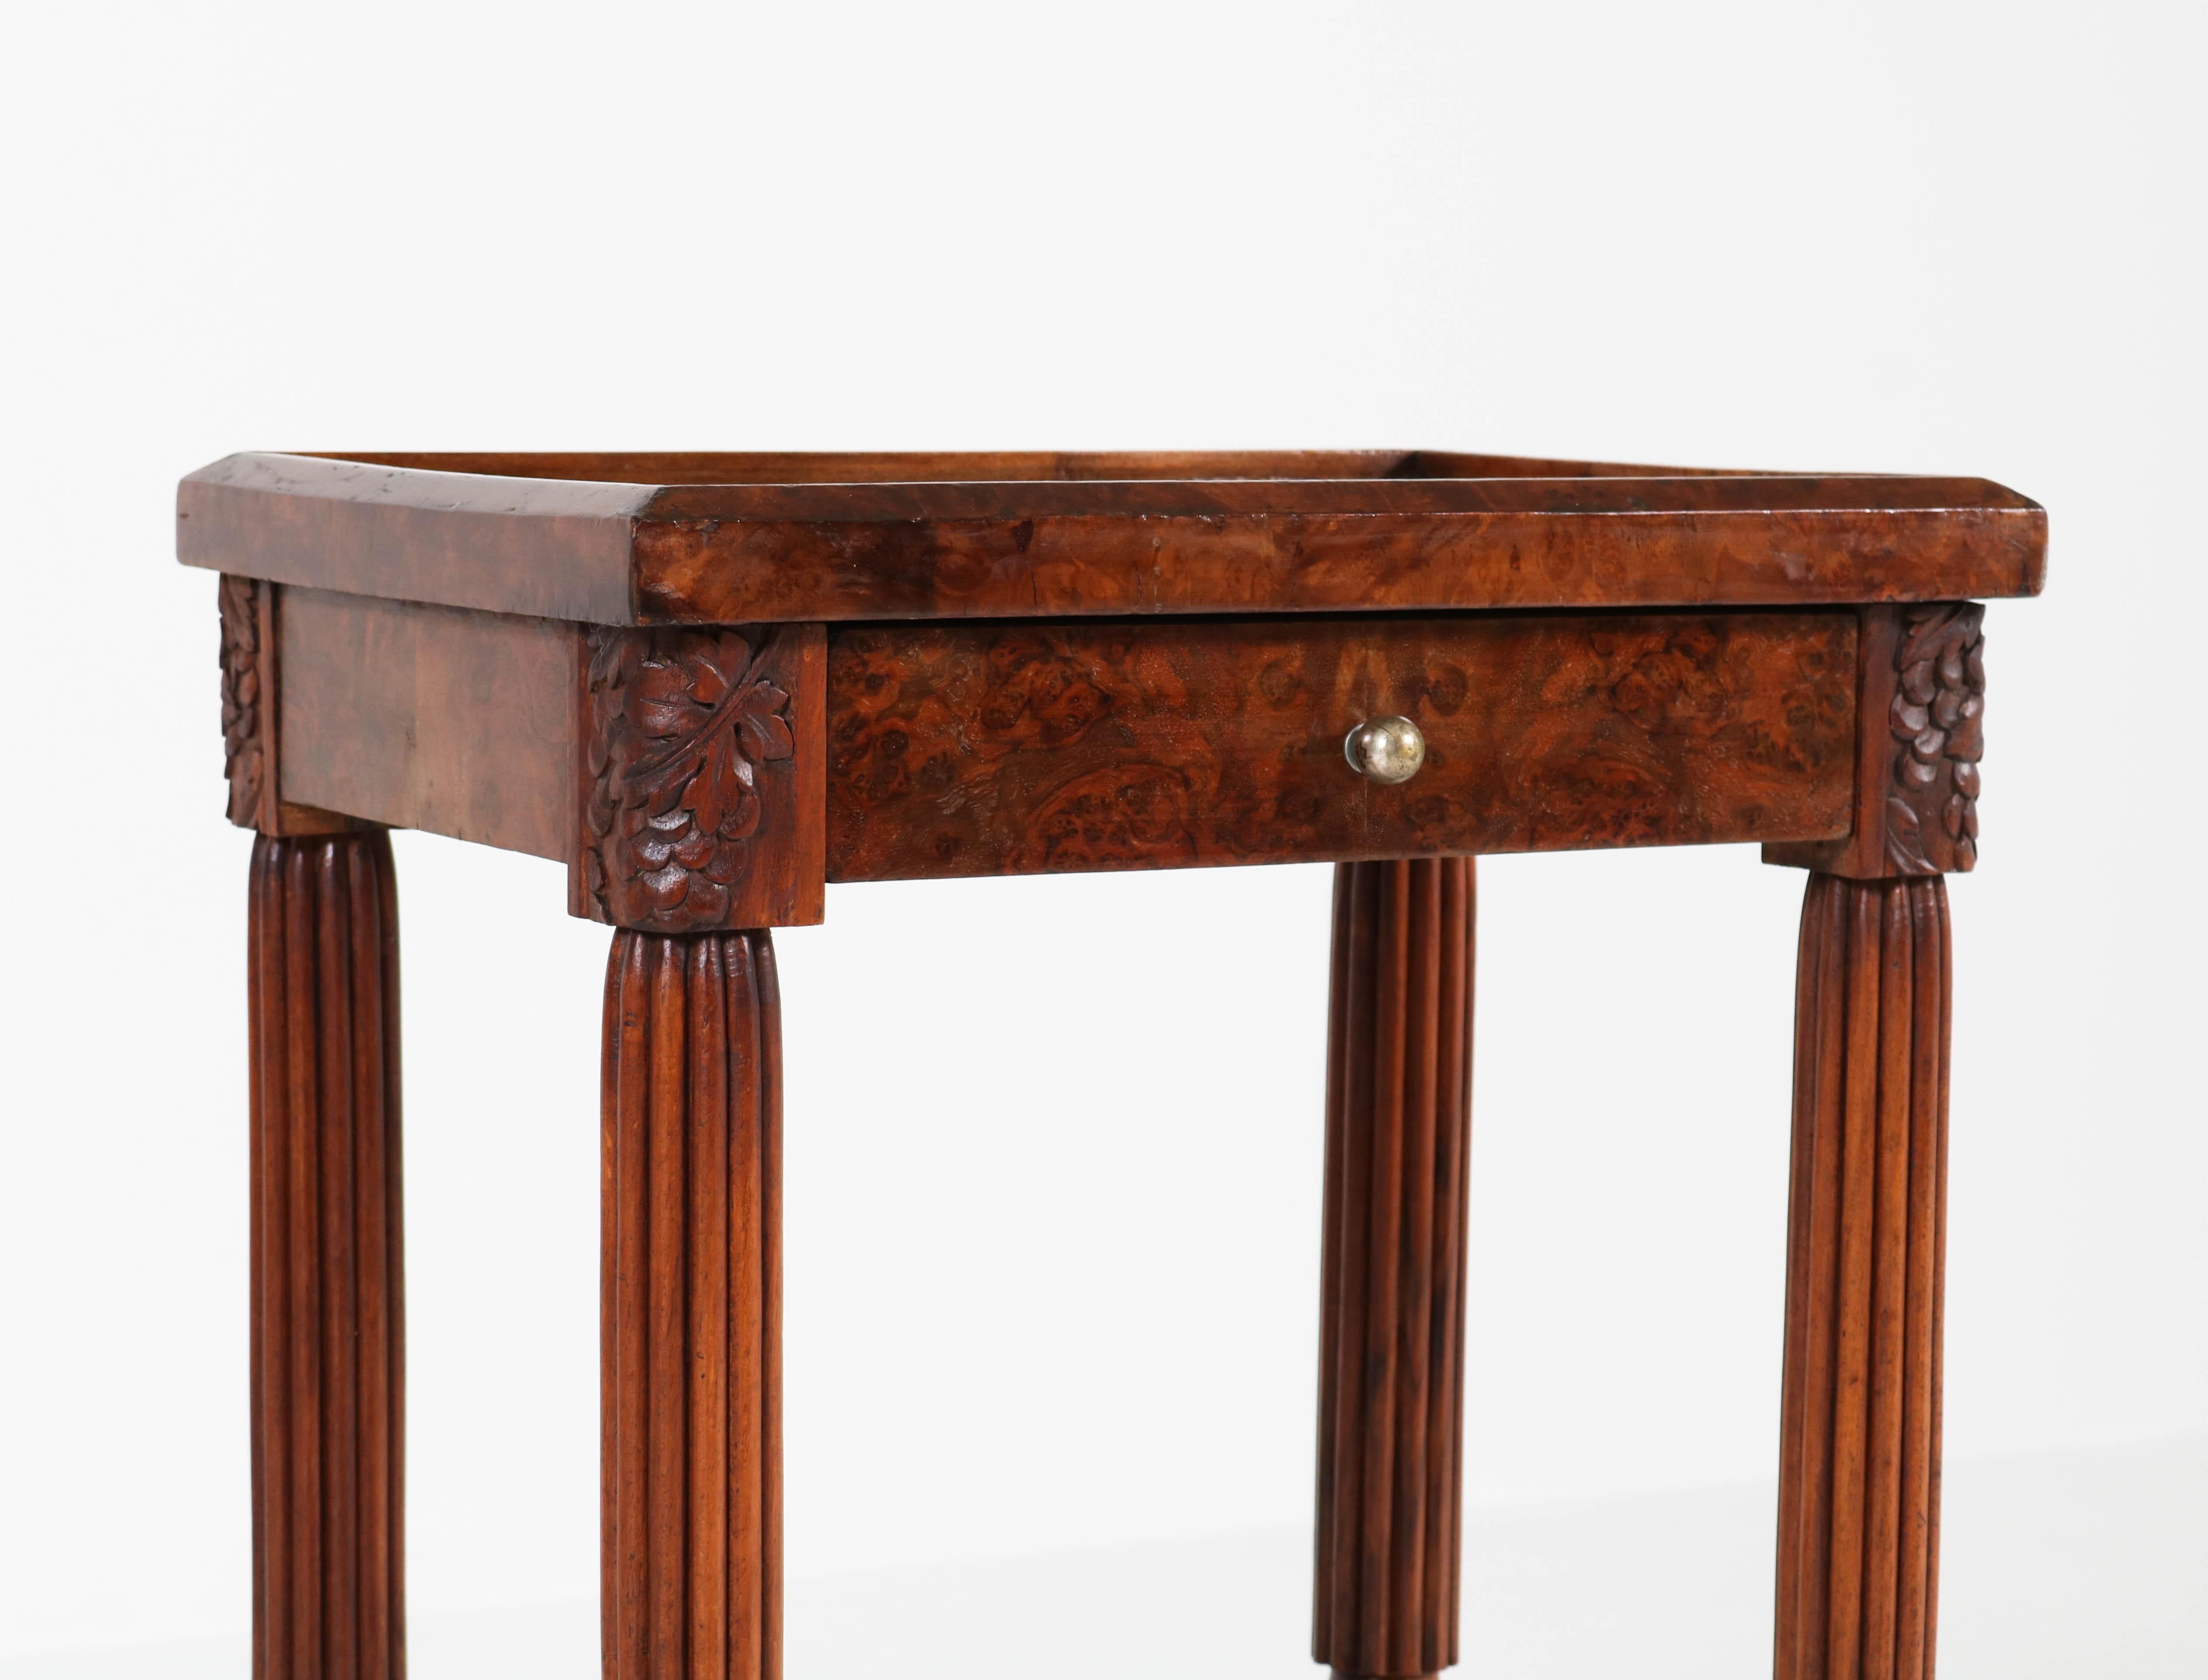 Offered by Amsterdam Modernism:
Stunning and elegant walnut Art Deco side table with drawer.
Striking French design from the 1920s.
In good original condition with minor wear consistent with age and use,
preserving a beautiful patina.
 